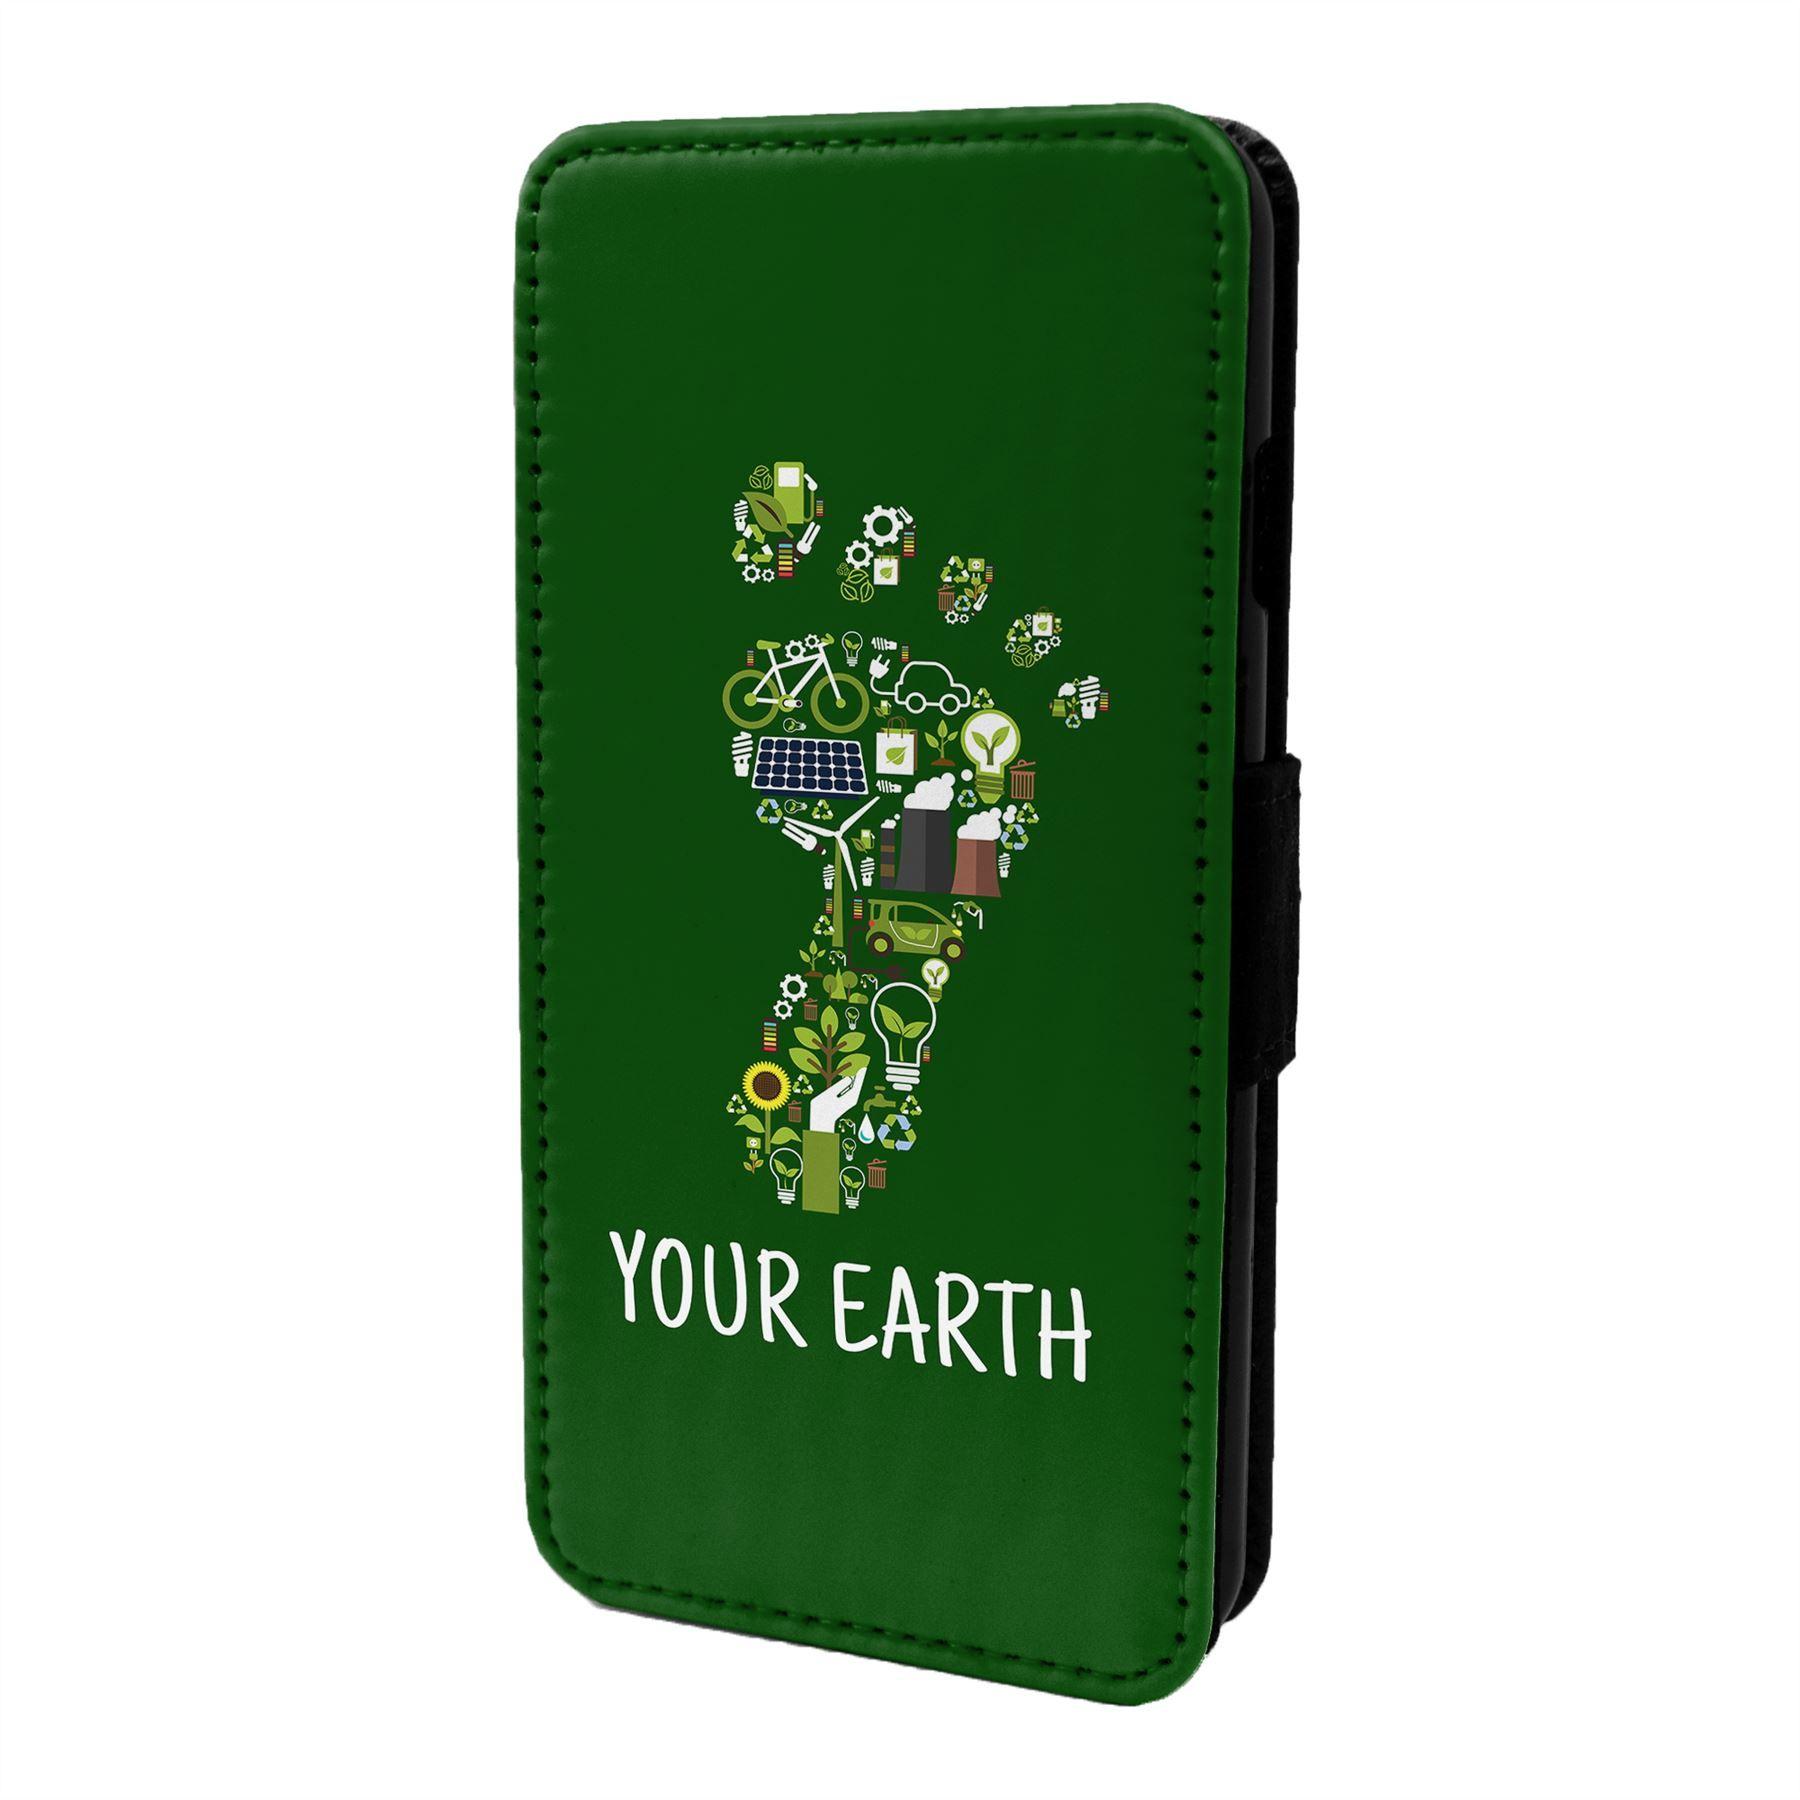 Eco-Friendly Green Logo - Eco Friendly Green Flip Case Cover For Mobile Phone